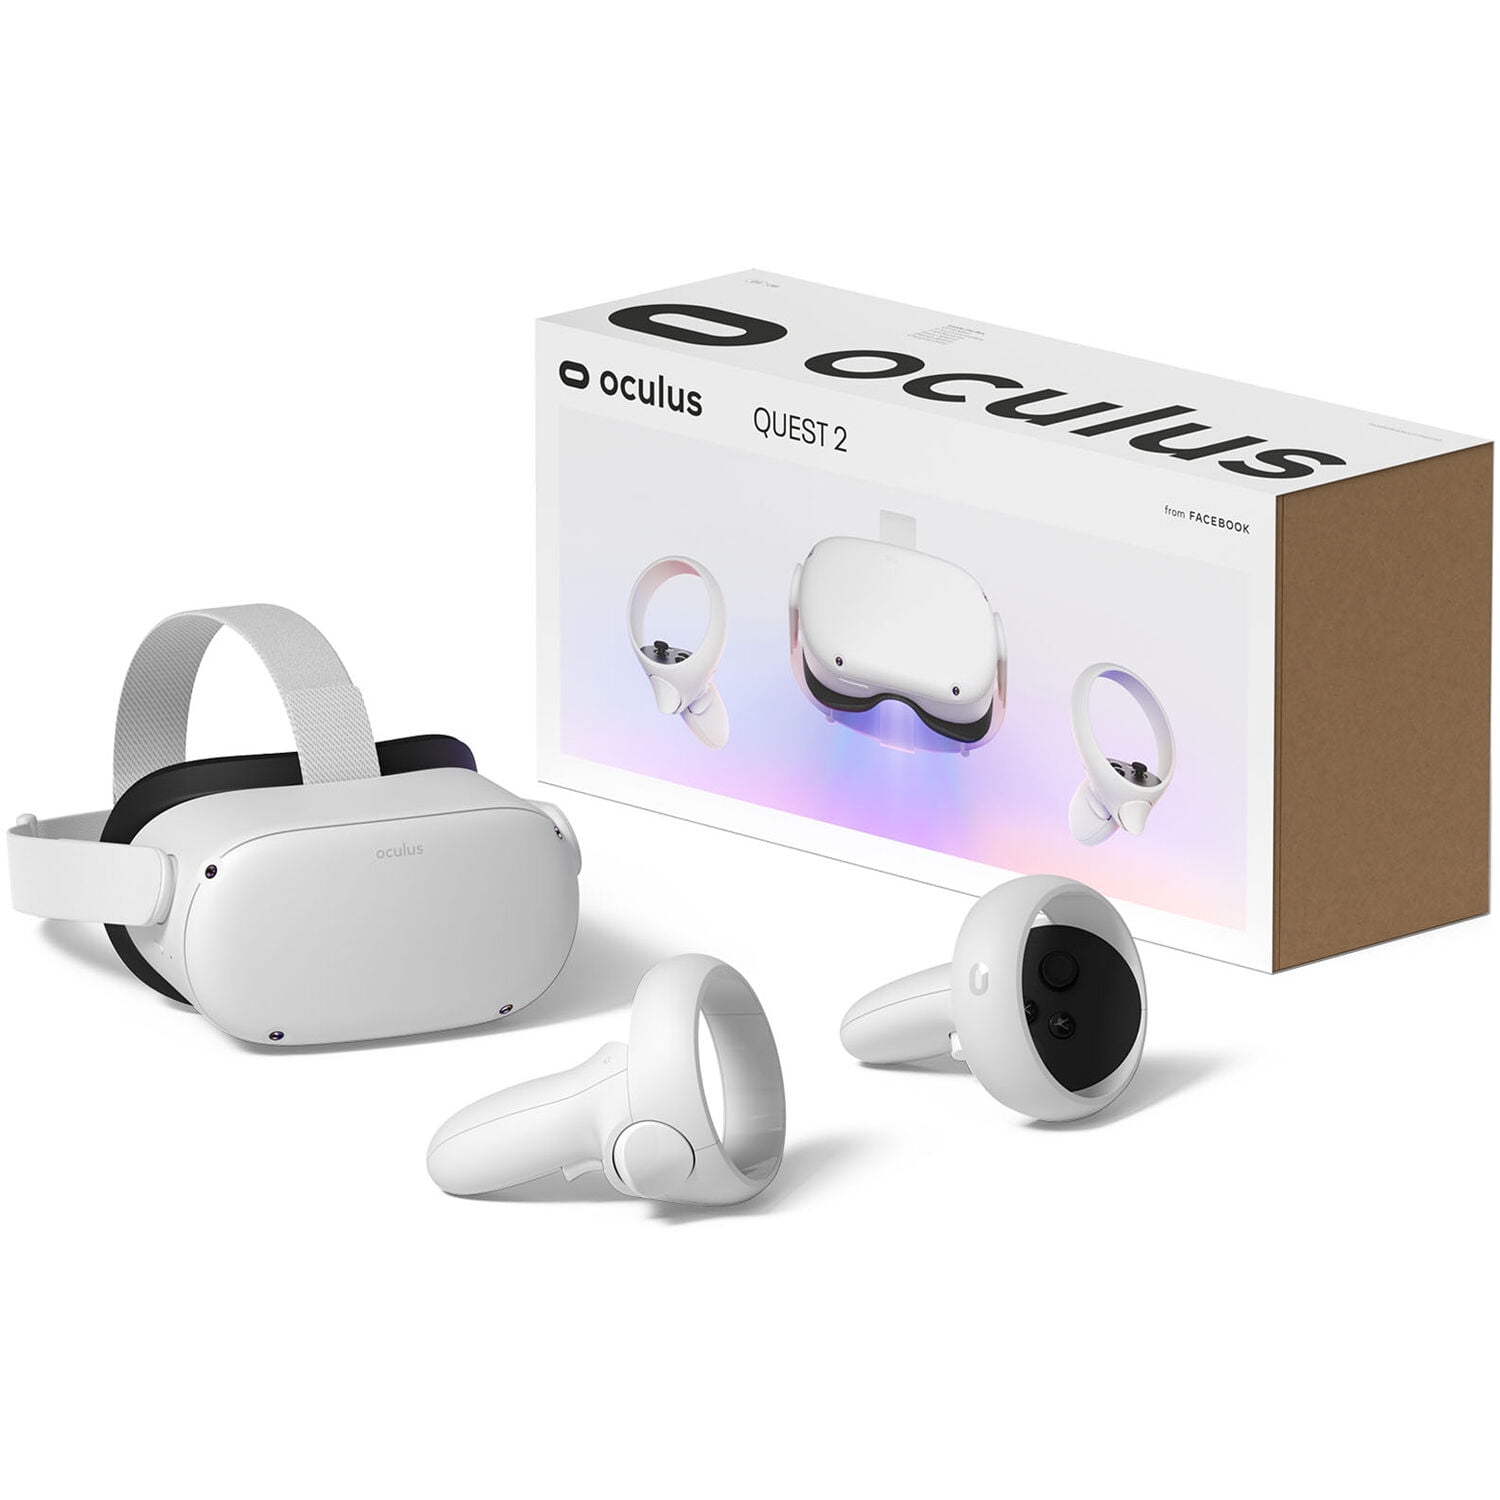 Oculus Quest 2 - Advanced All-In-One Virtual Reality Gaming Headset - White - Family Holiday Gaming Entertainment - 64GB Video - Walmart.com